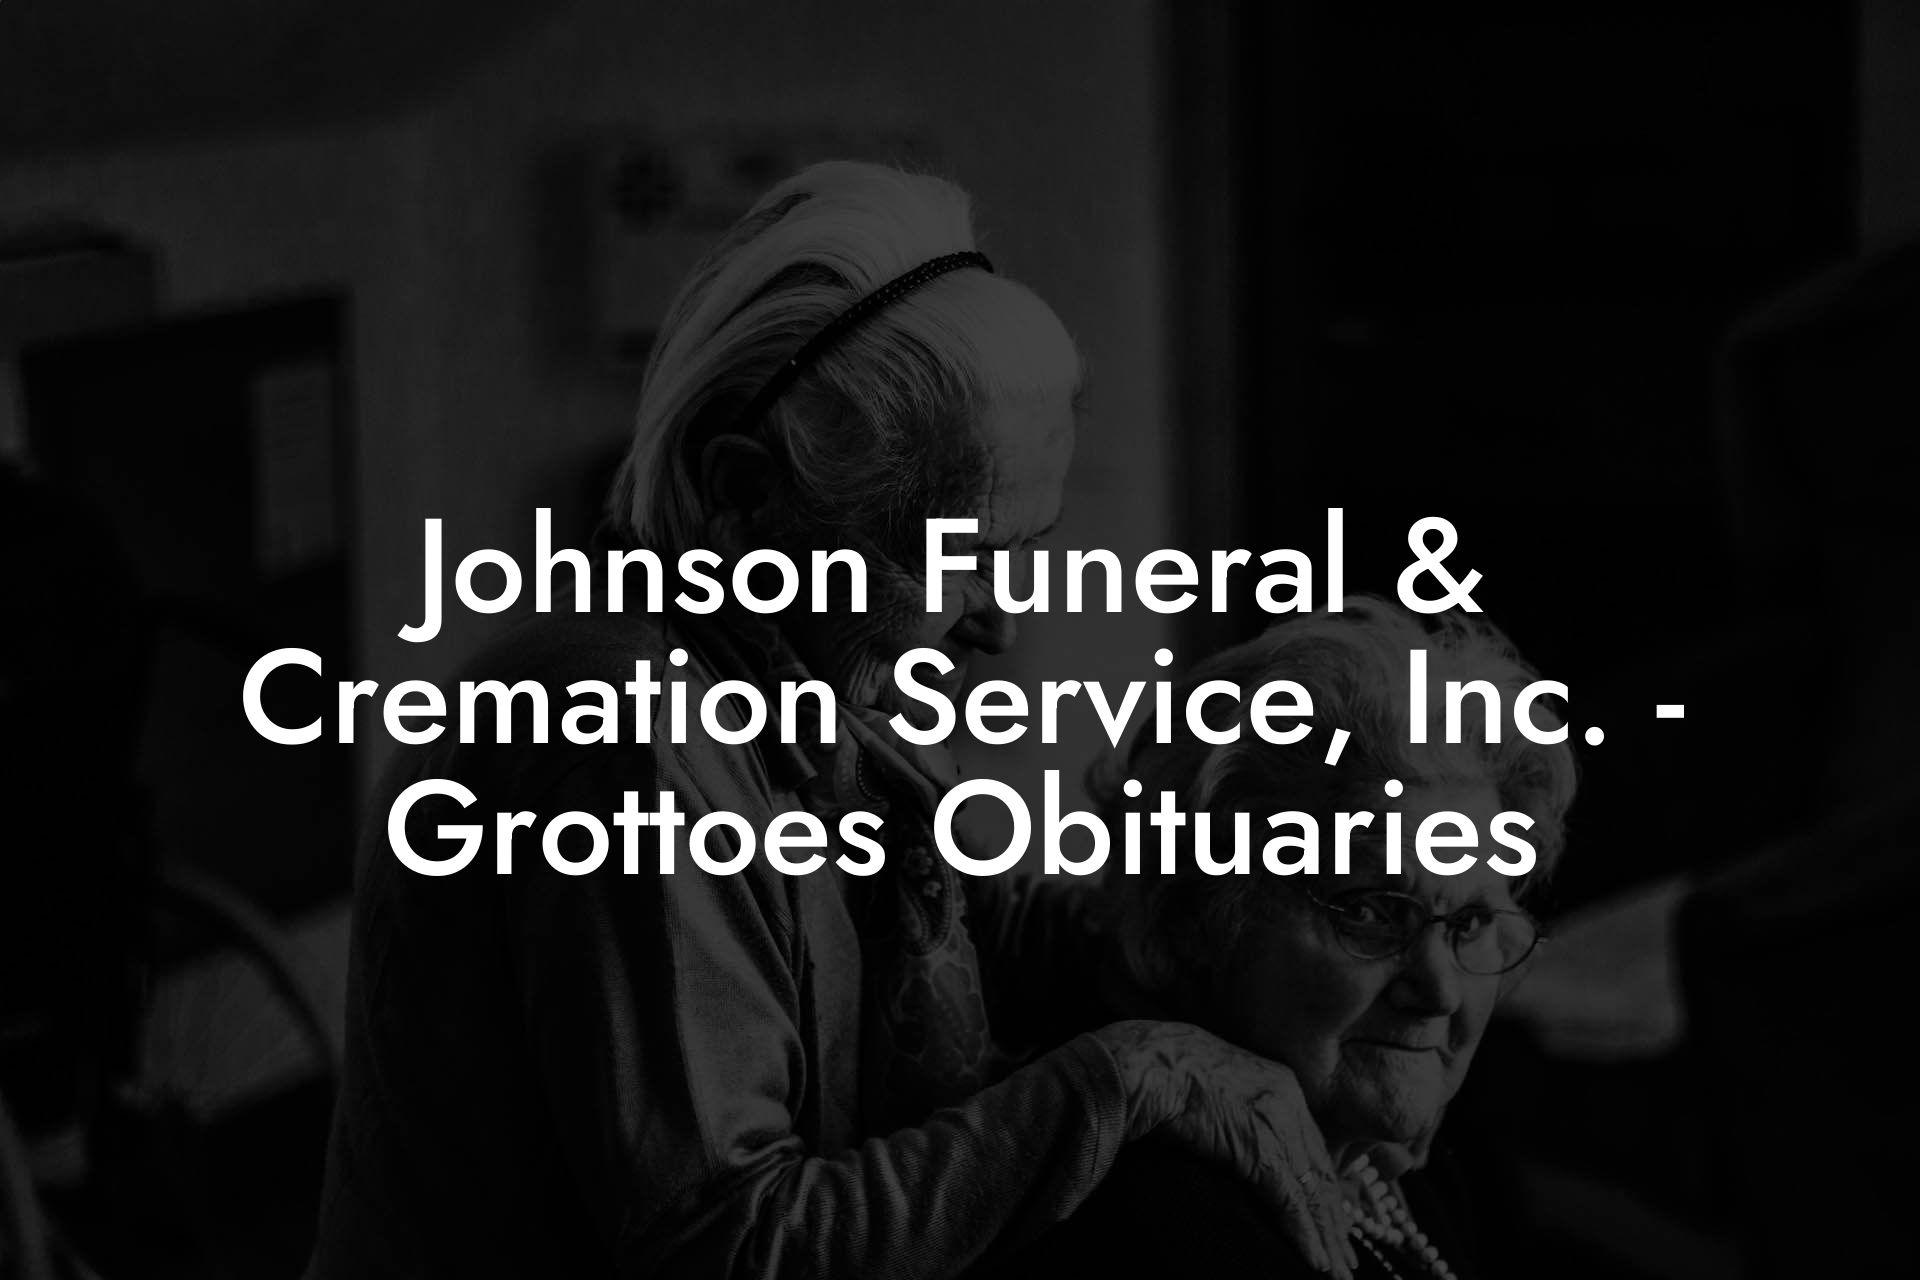 Johnson Funeral & Cremation Service, Inc. - Grottoes Obituaries